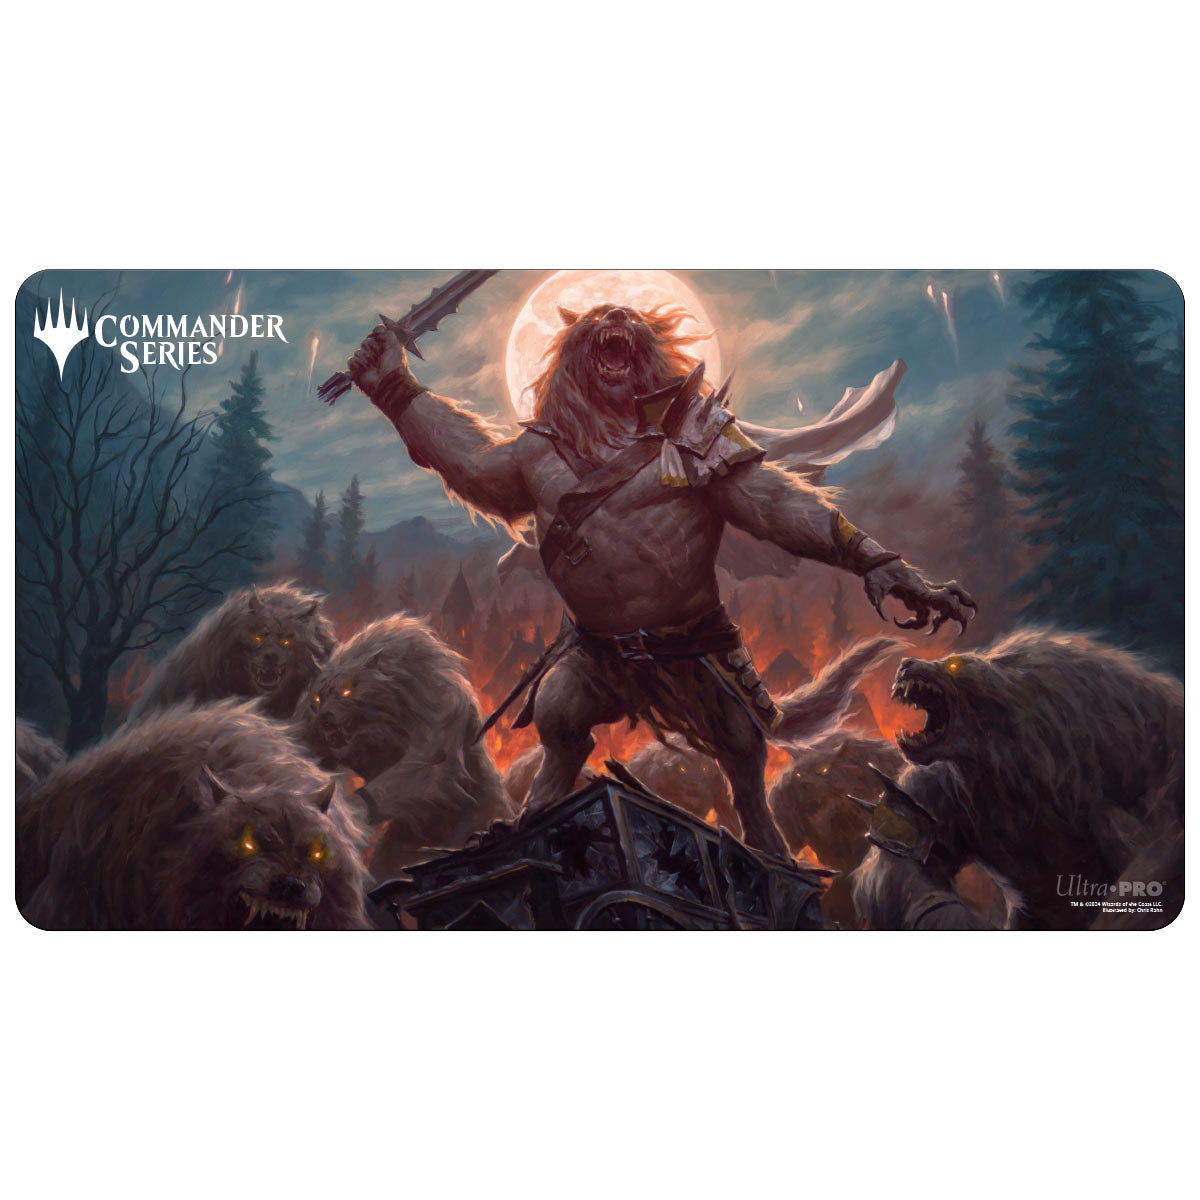 Magic: the Gathering - Stitched Playmat: Commander Series 2 - Tovolar (Double-Sided) - Bards & Cards